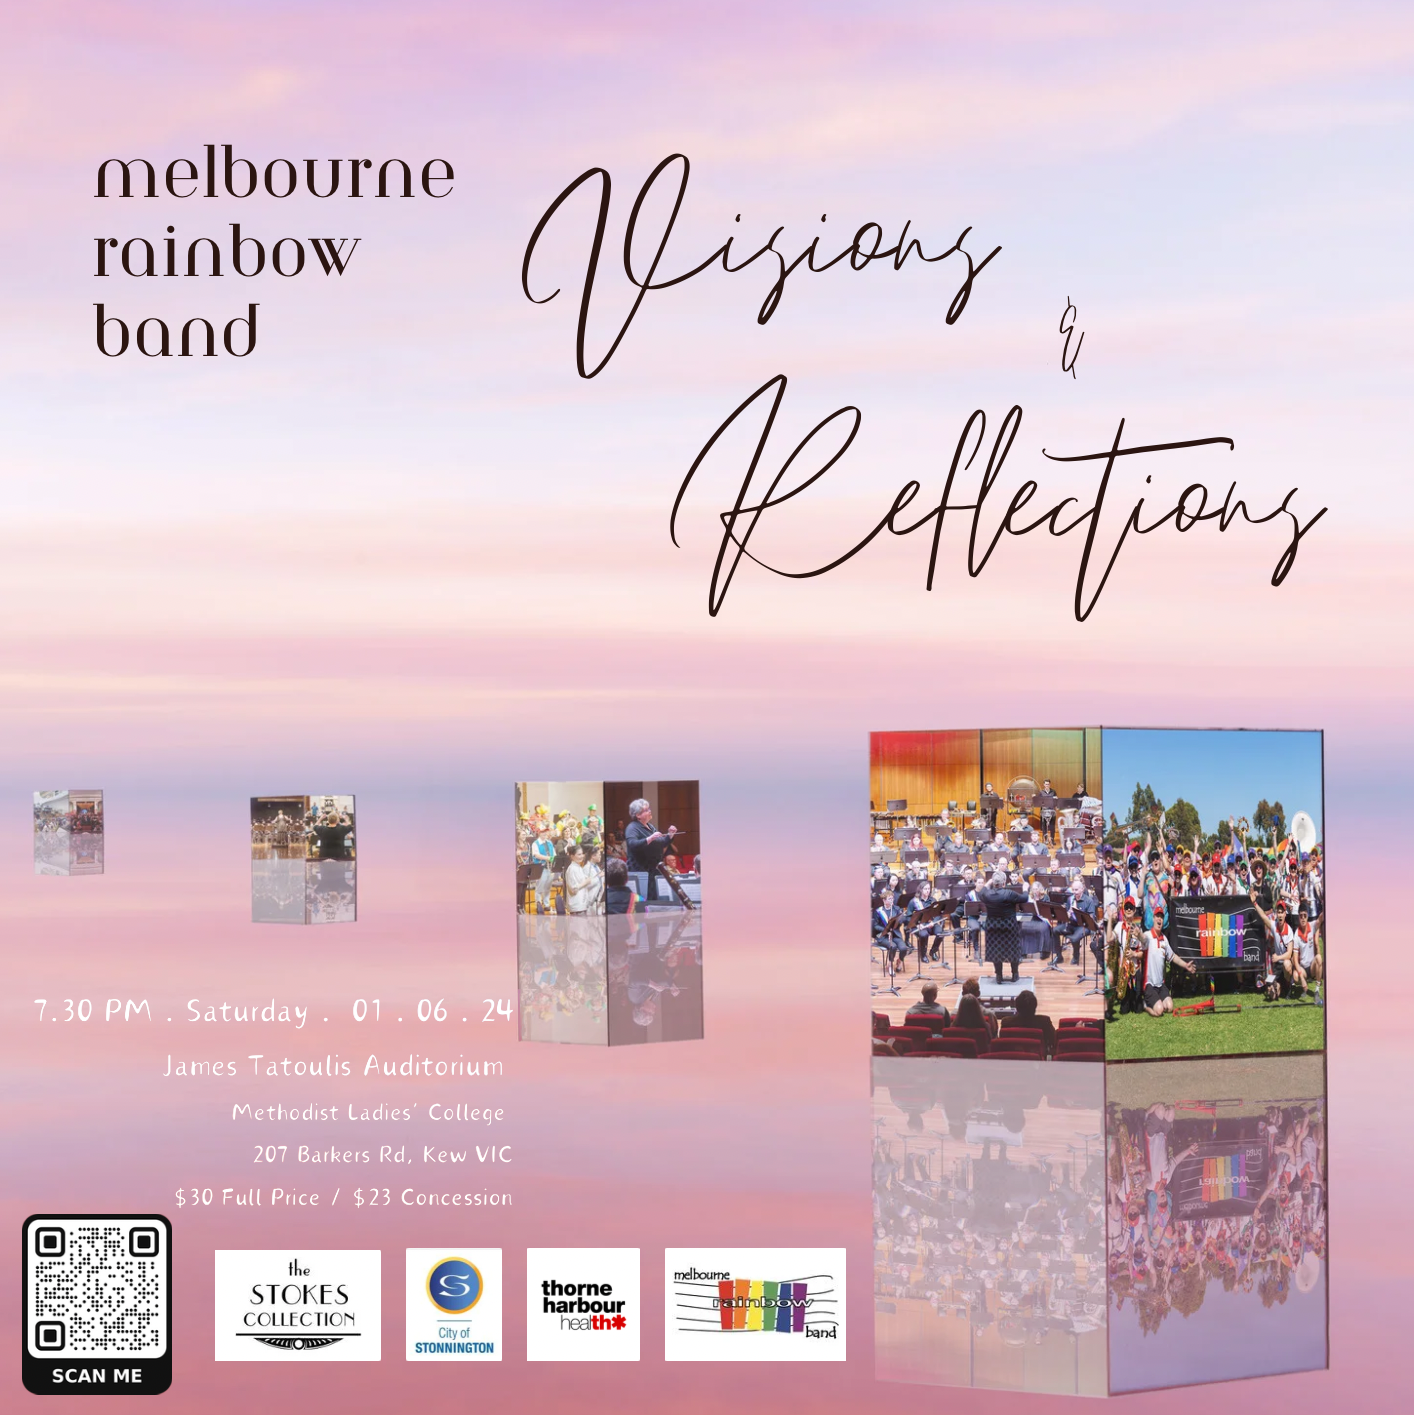 Melbourne Rainbow Band presents 'Visions & Reflections' - Event details, partners, and band members featured. QR code in bottom left.